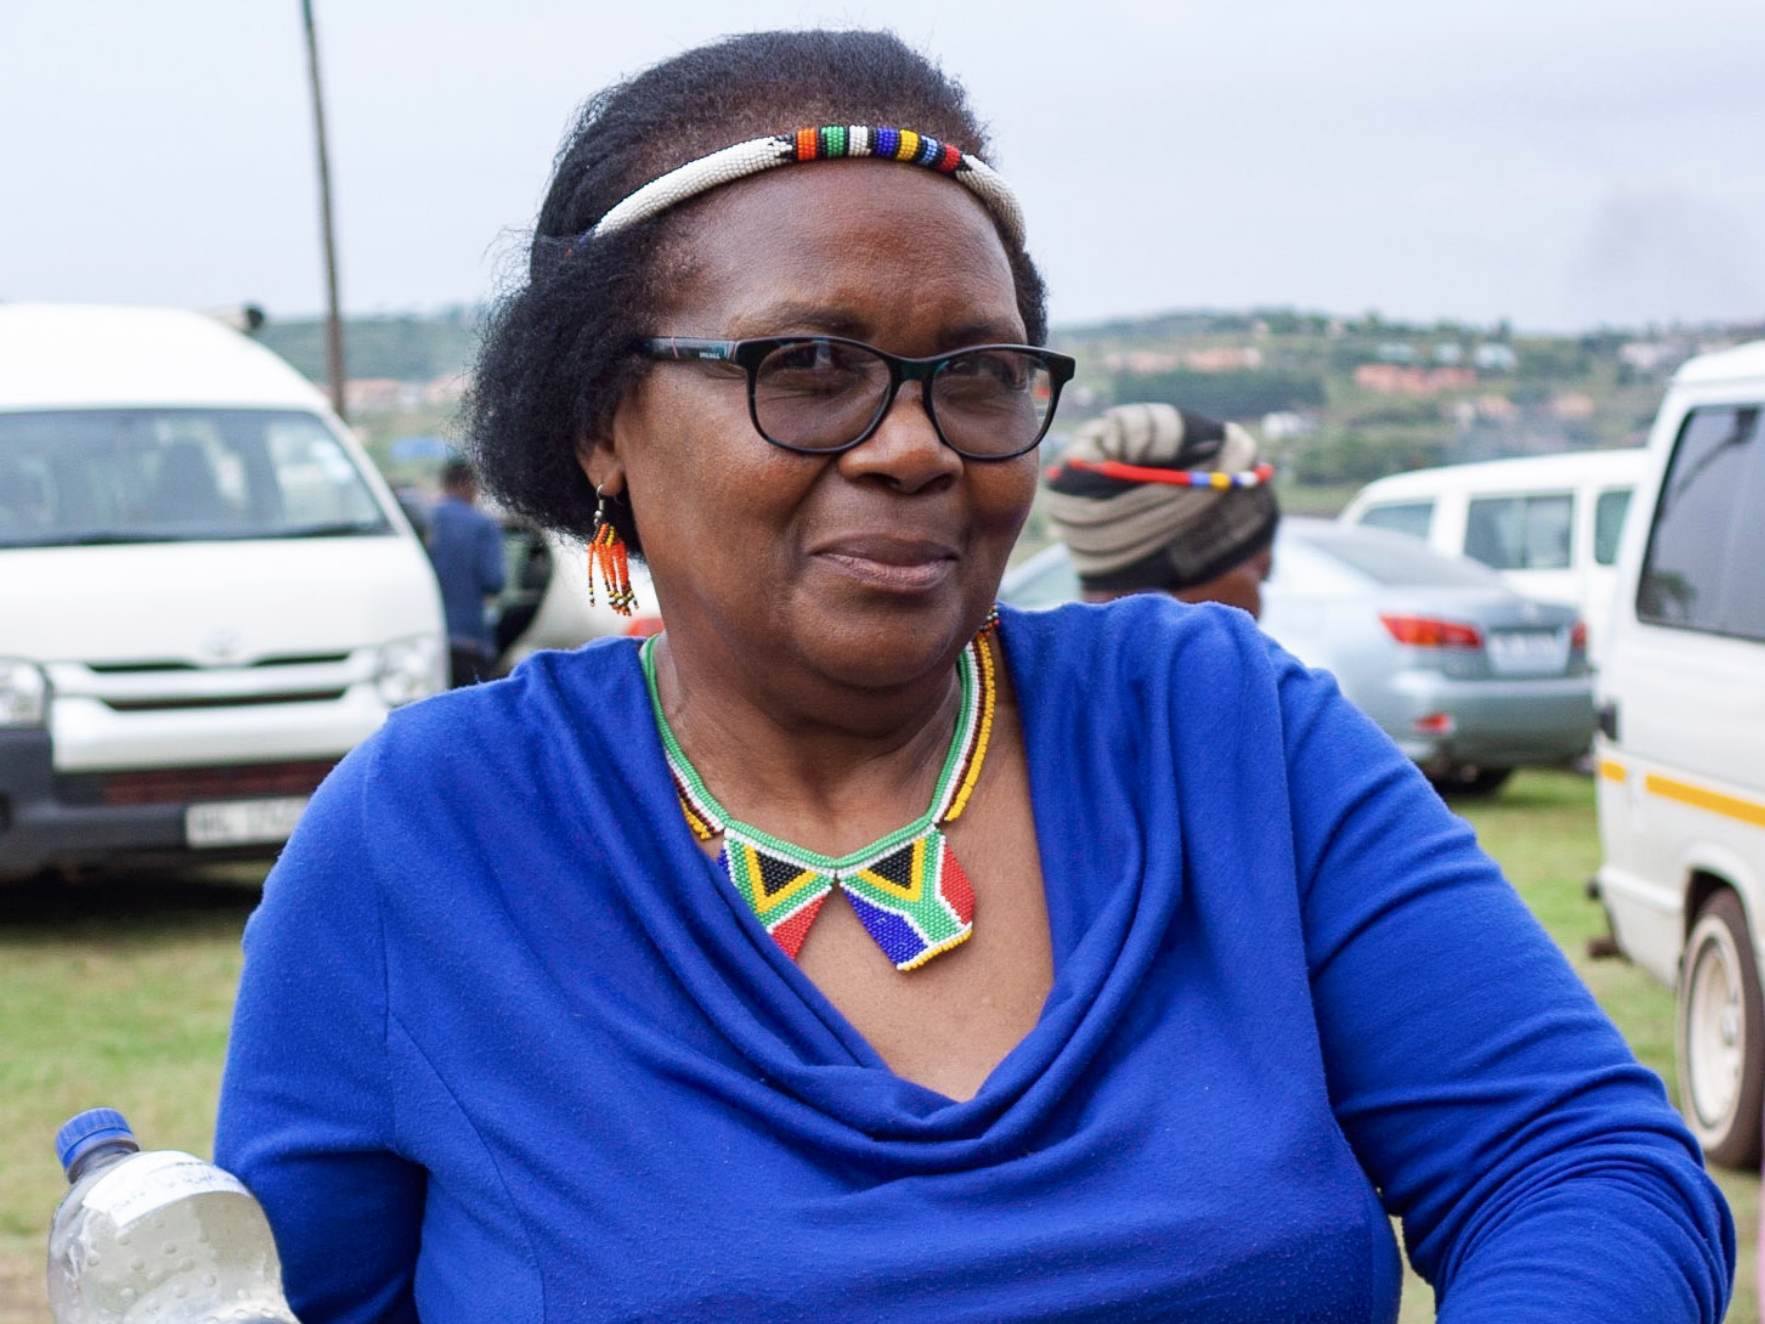 Fikile Ntshangase woman in blue with colorful necklace headband holding water bottles